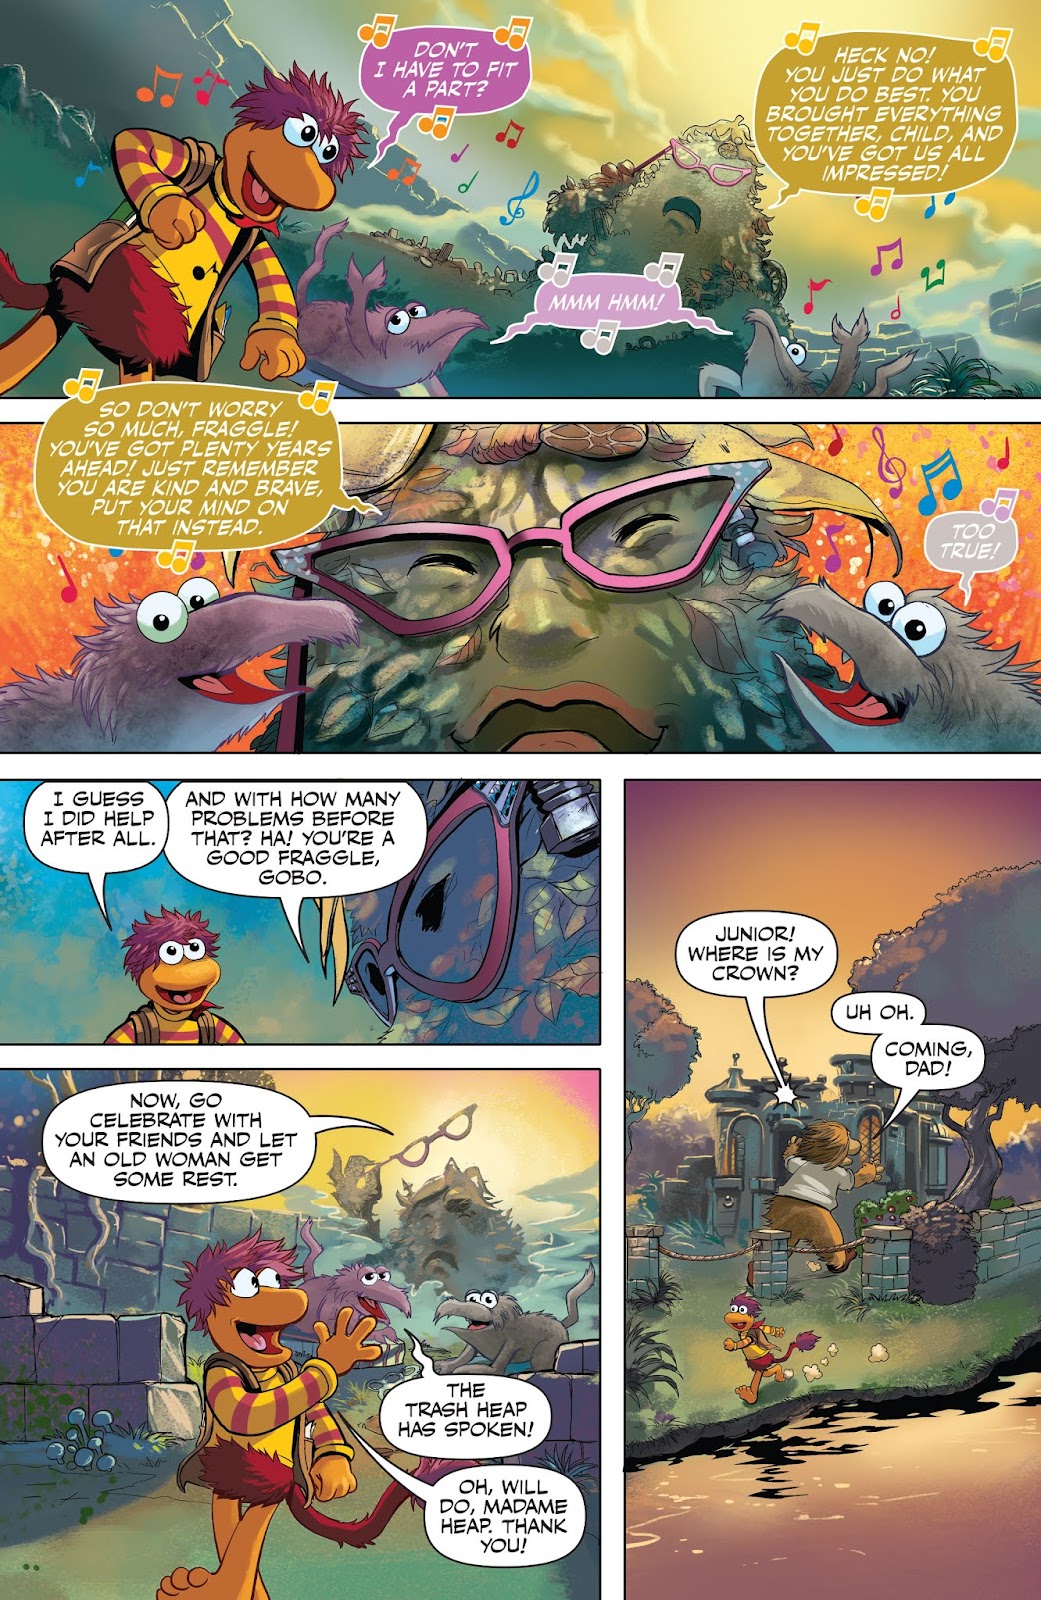 Jim Henson's Fraggle Rock: Journey to the Everspring issue 4 - Page 19